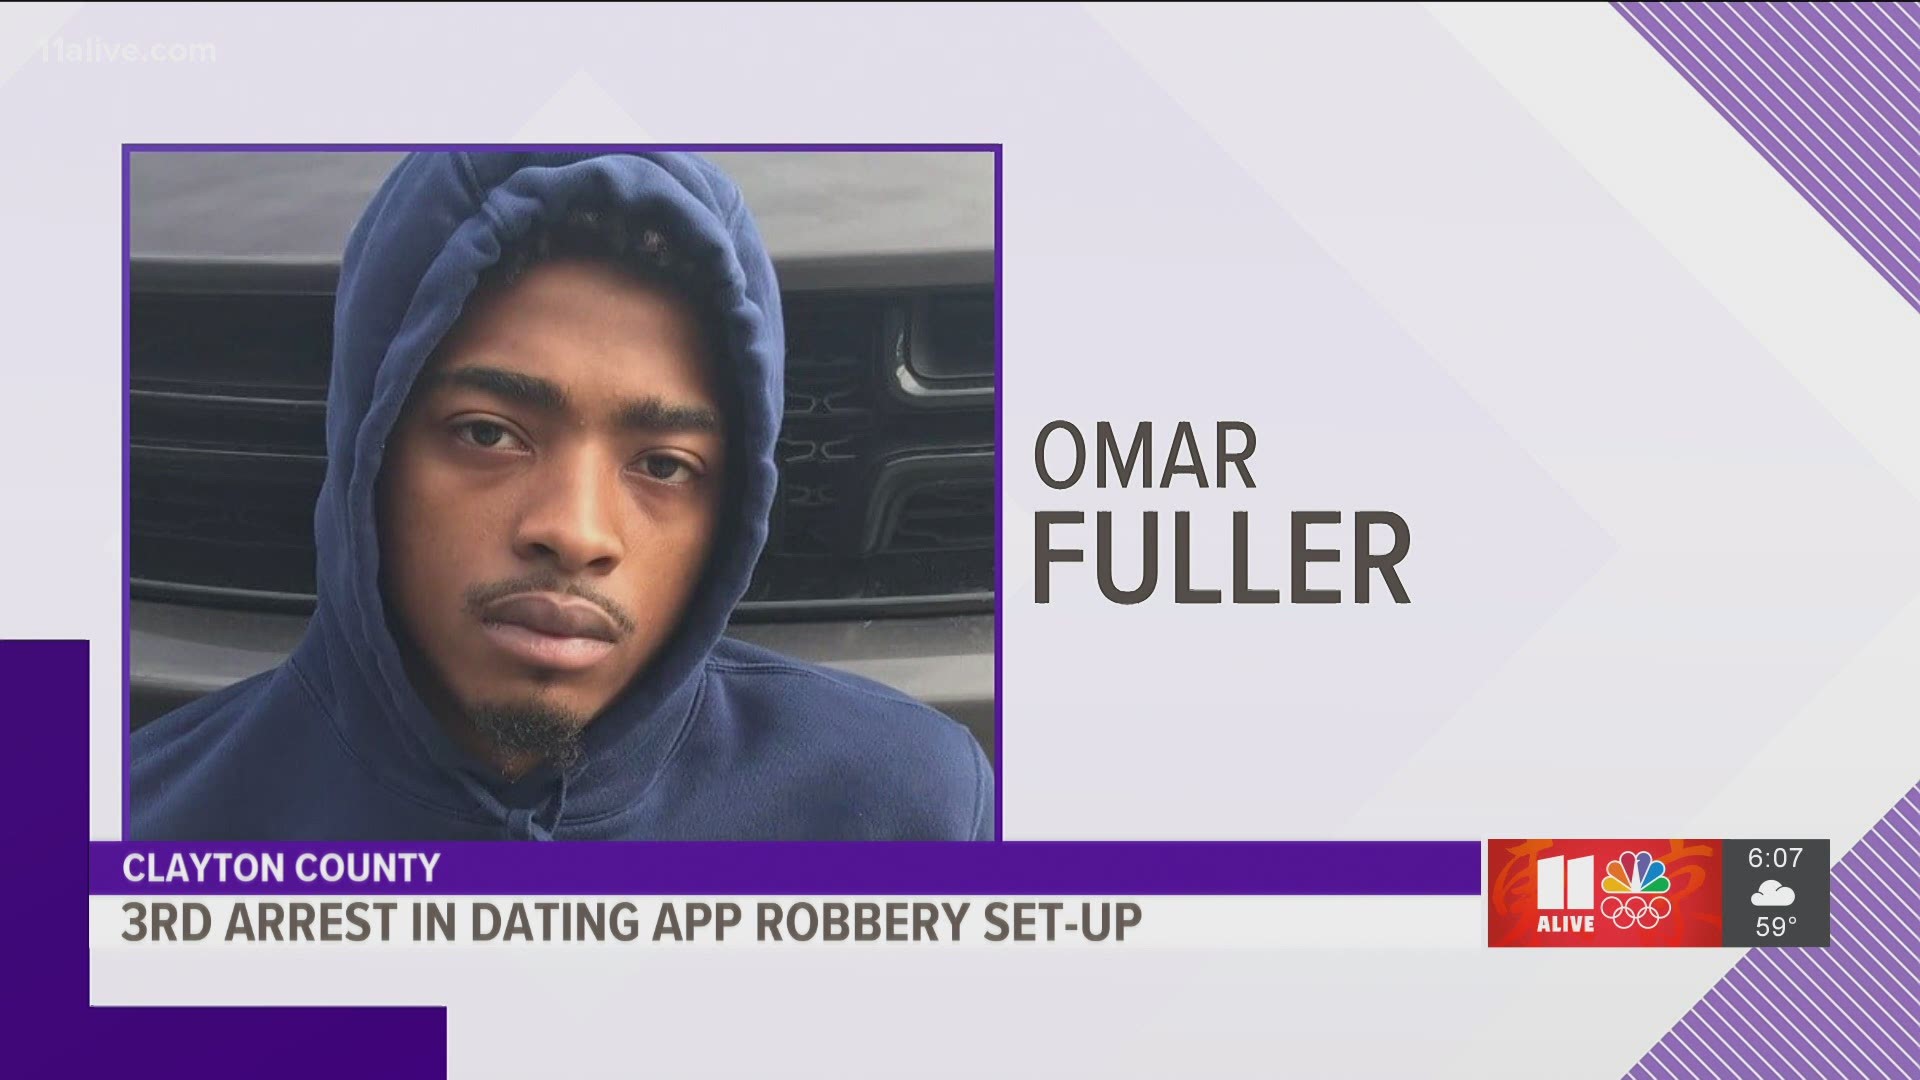 A third person has been arrested in connection with a violent armed robbery set up using a dating app in Clayton County earlier in the month.